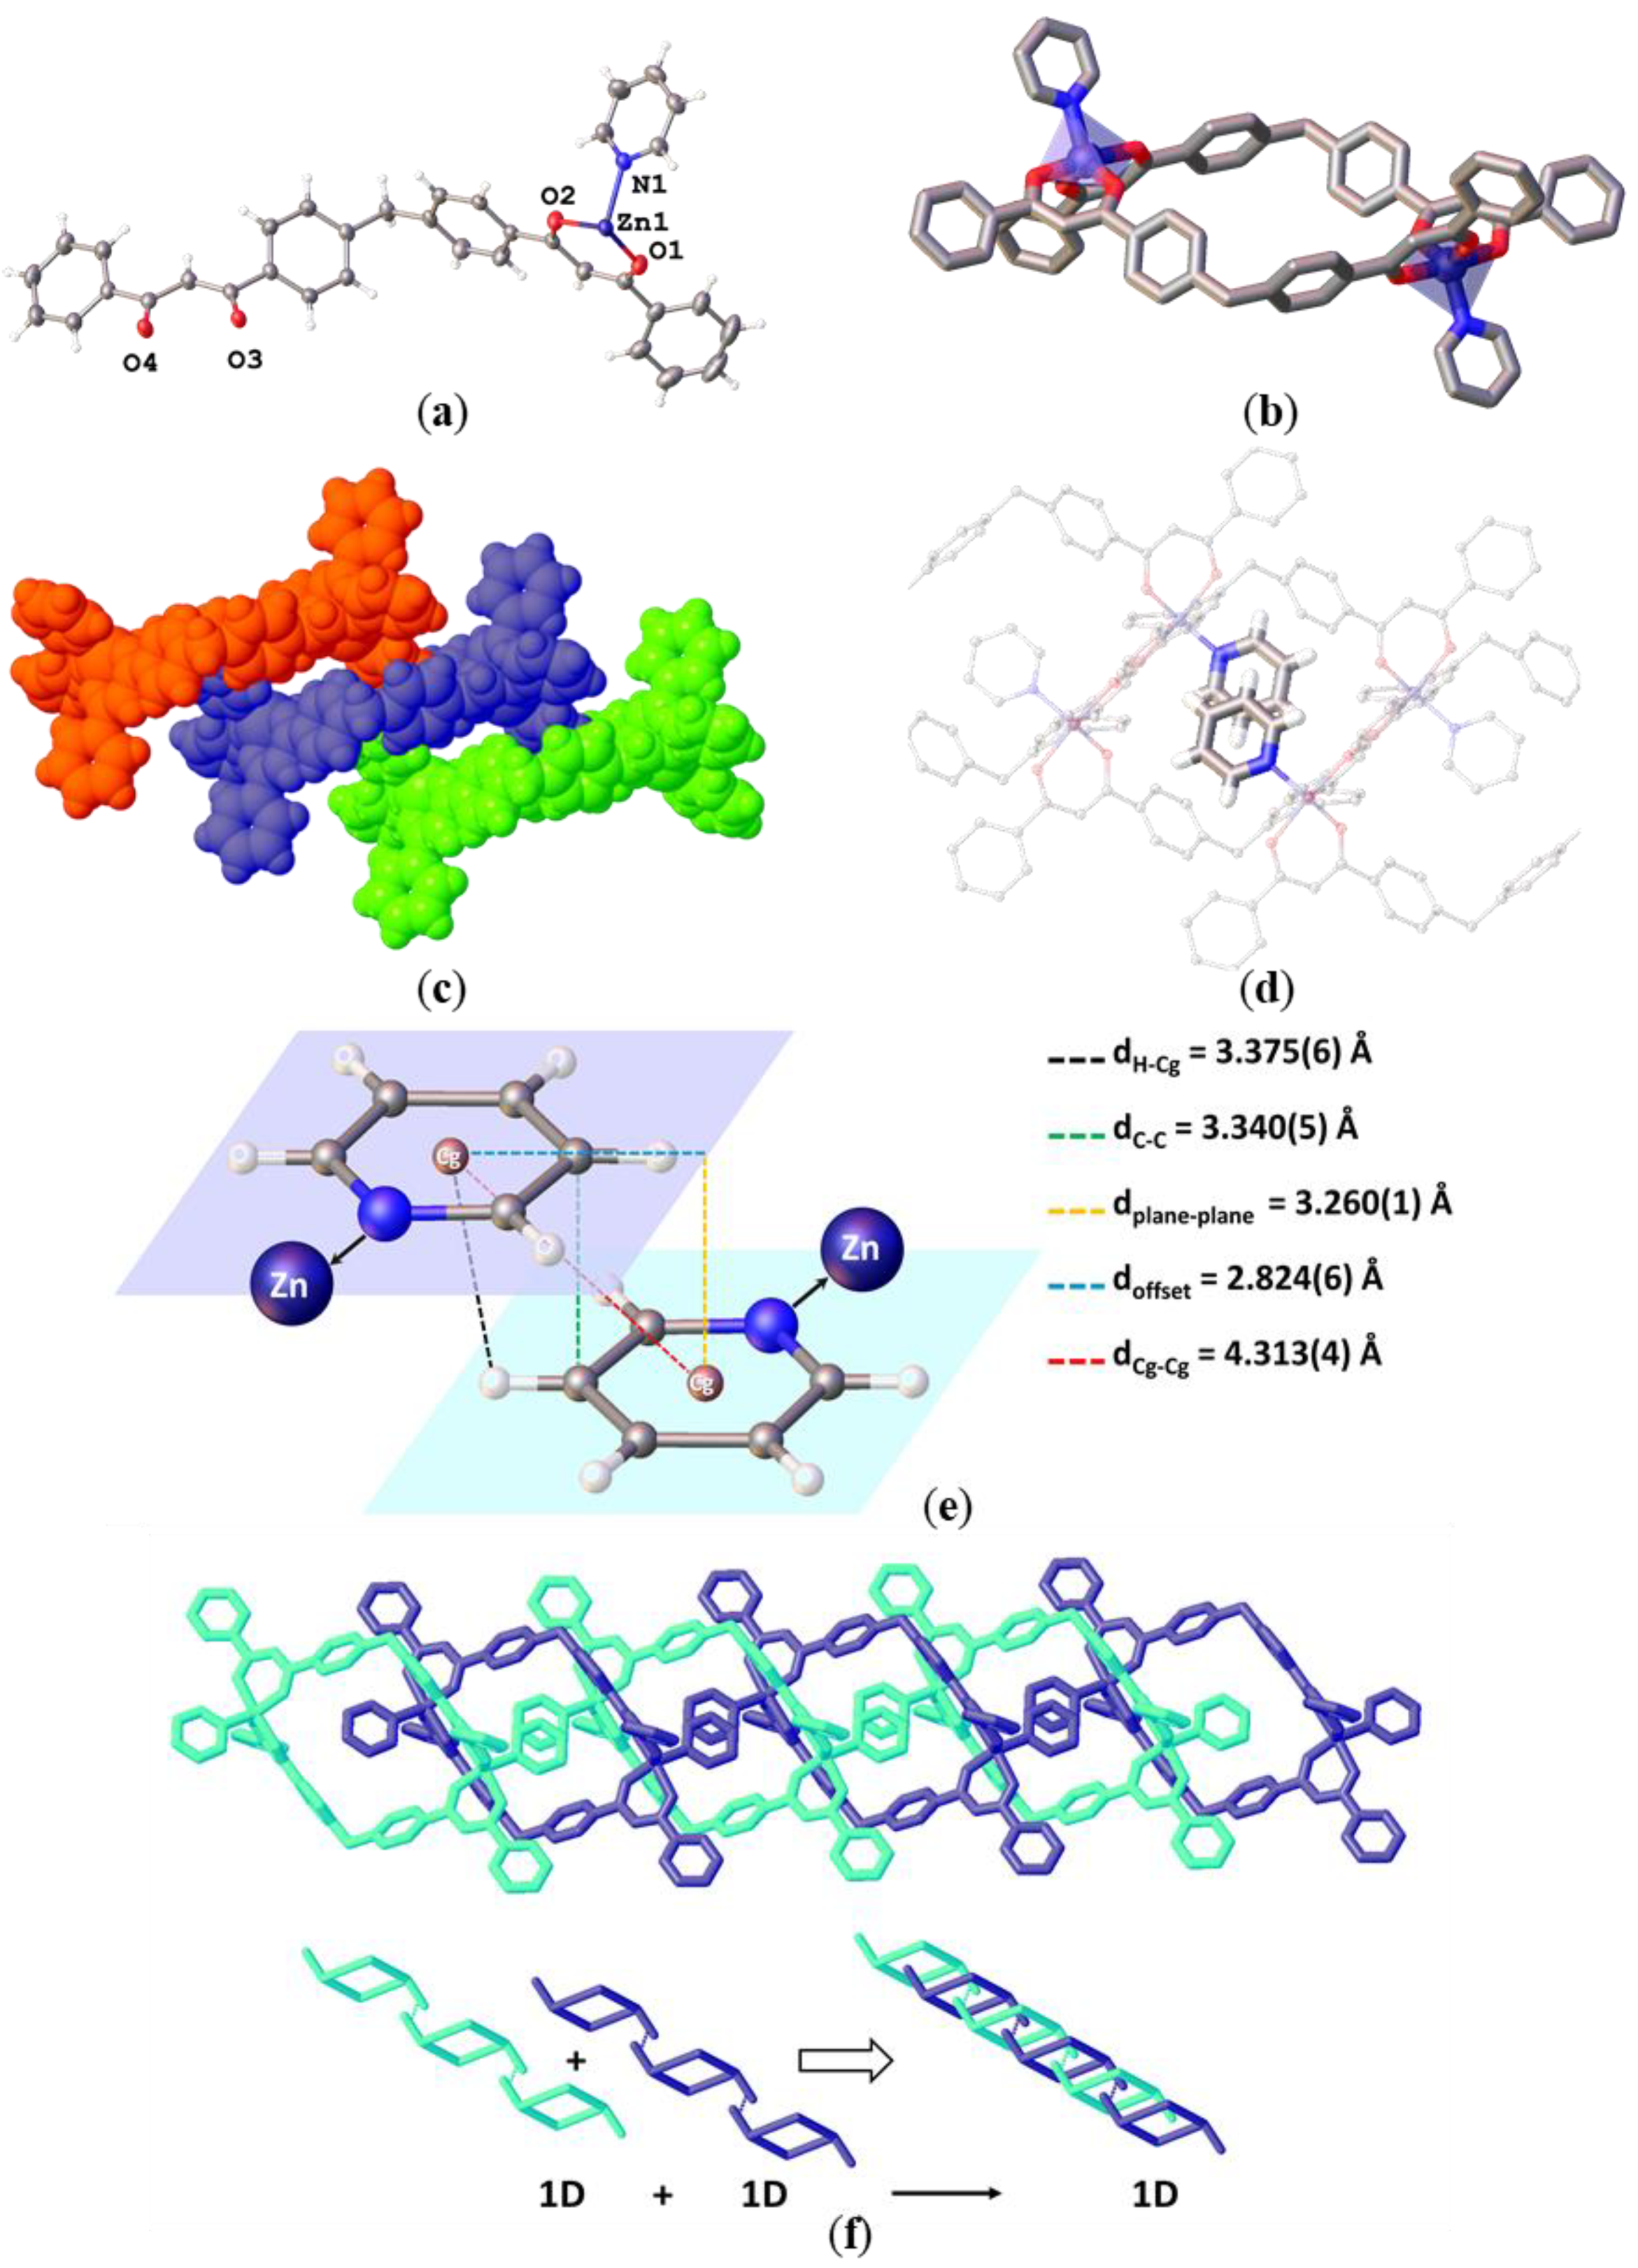 Inorganics Free Full Text A Zn Ii Metallocycle As Platform To Assemble A 1d 1d 1d Polyrotaxane Via P P Stacking Of An Ancillary Ligand Html